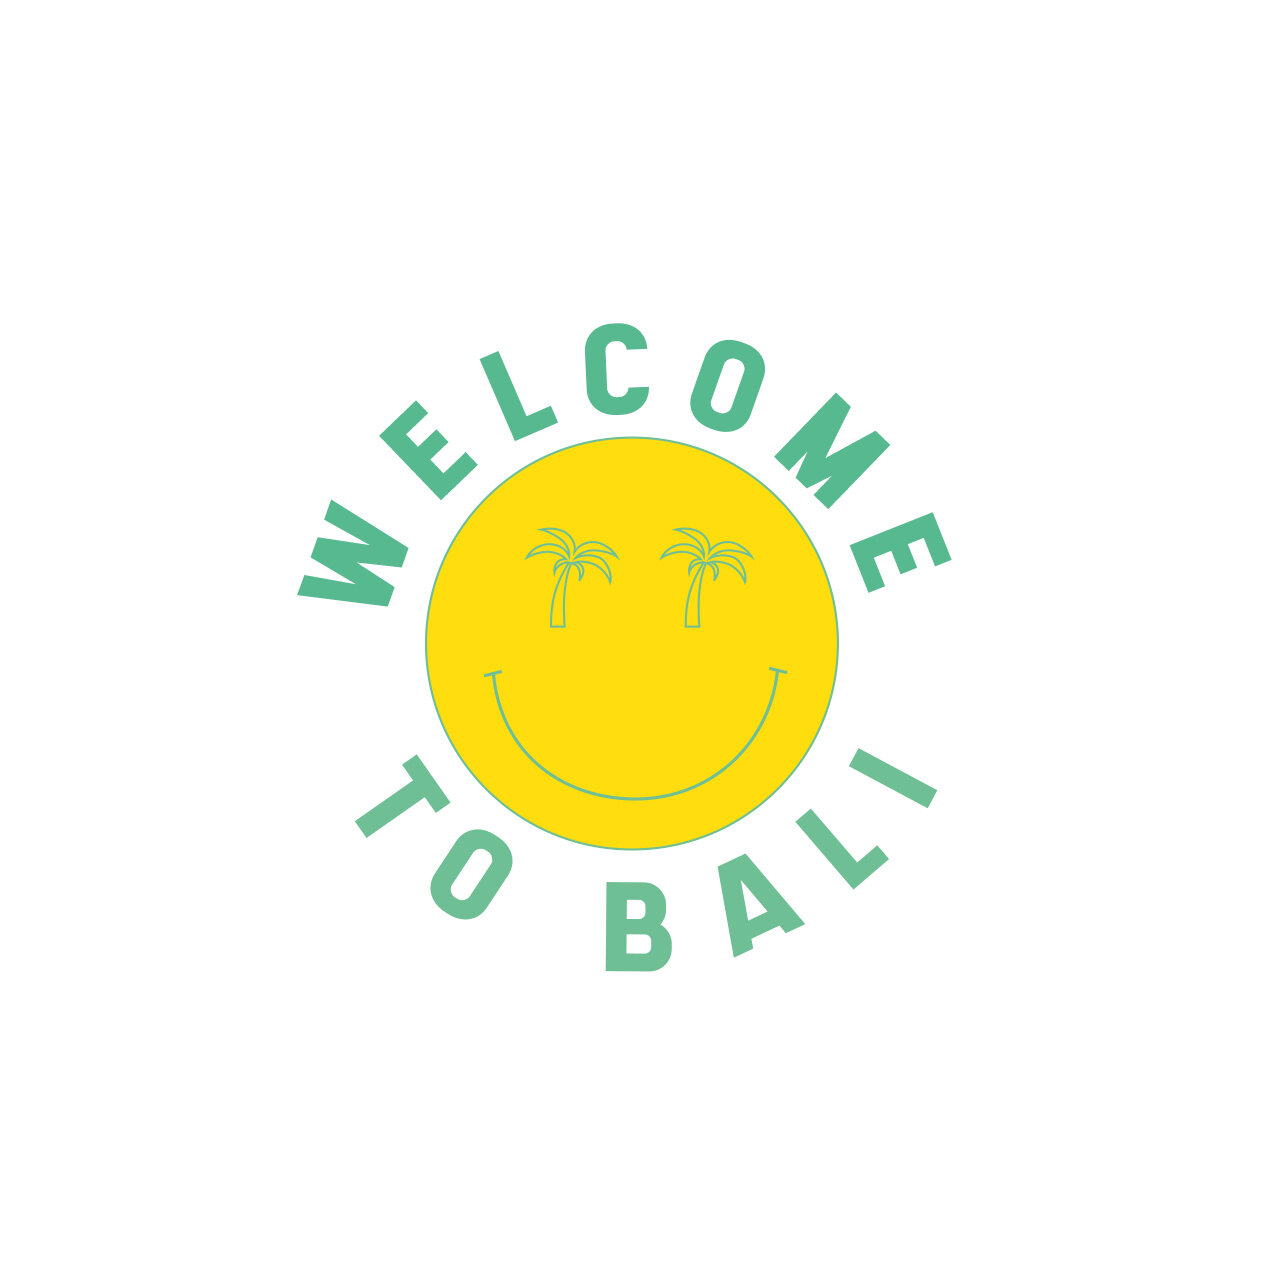 Welcome to Bali